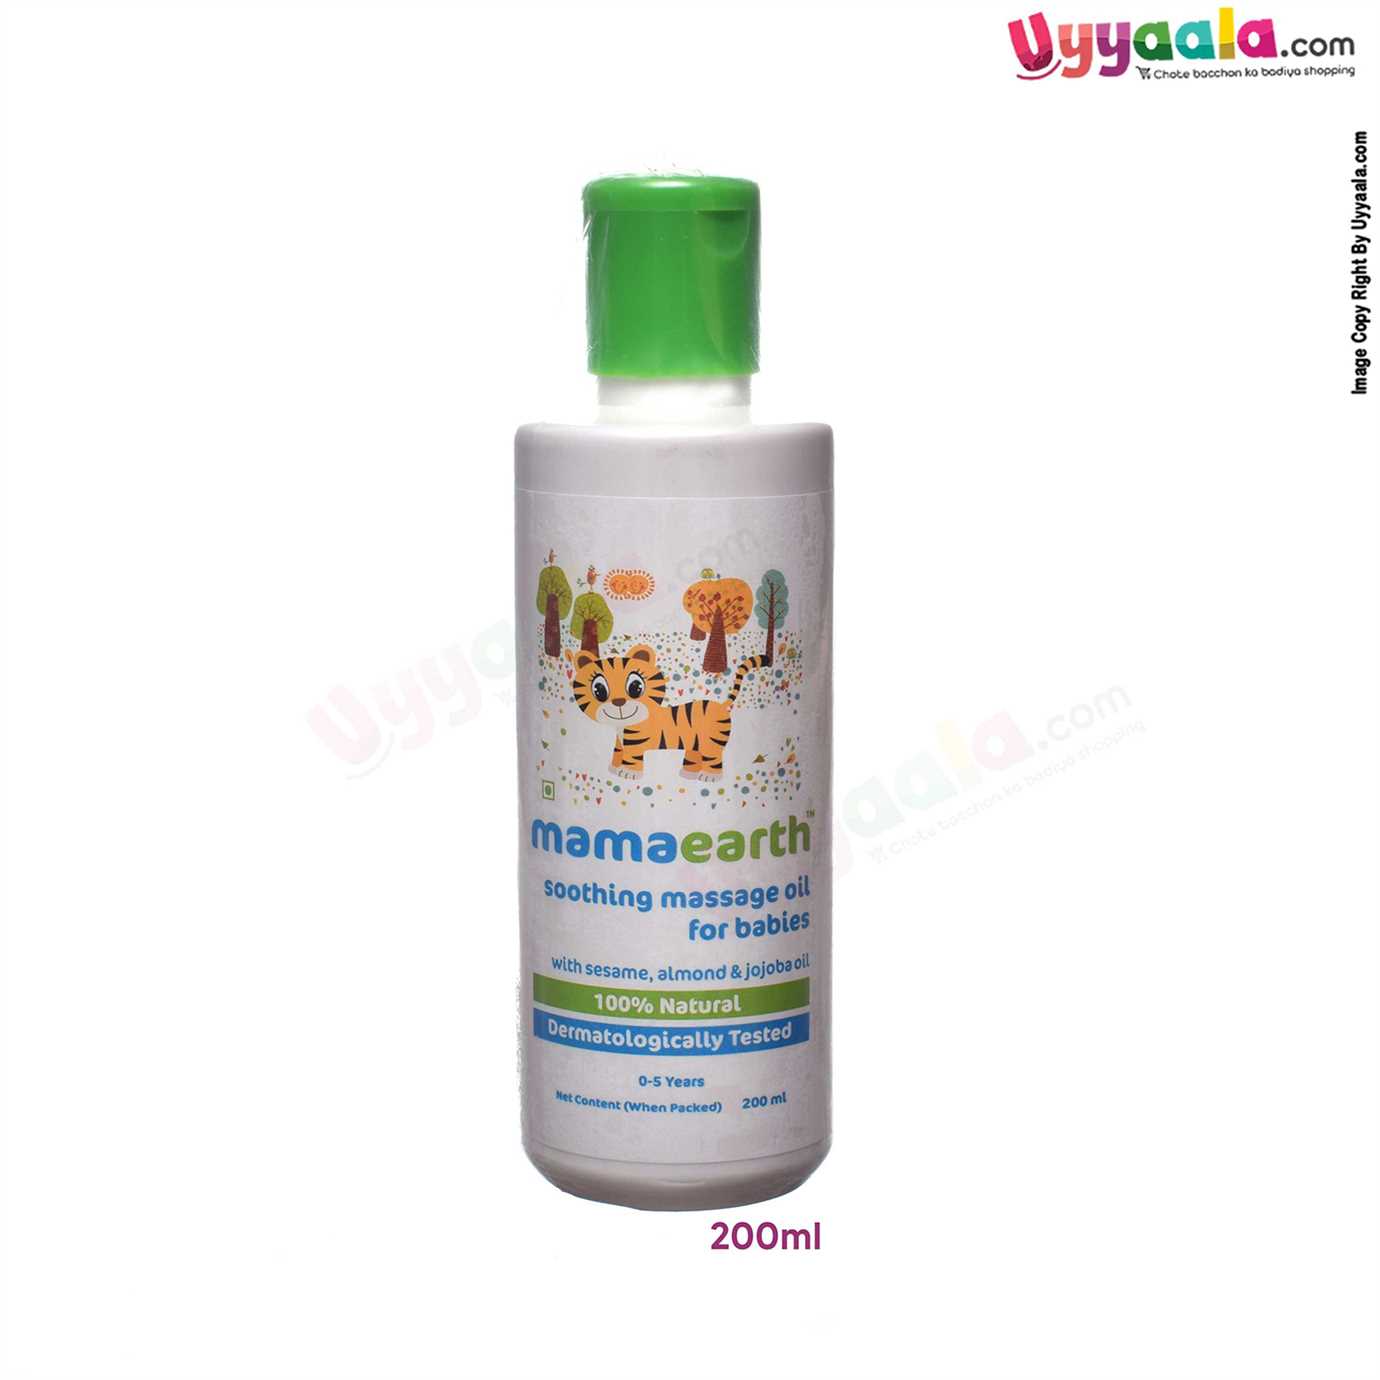 mamaearth Soothing Massage Oil For Babies